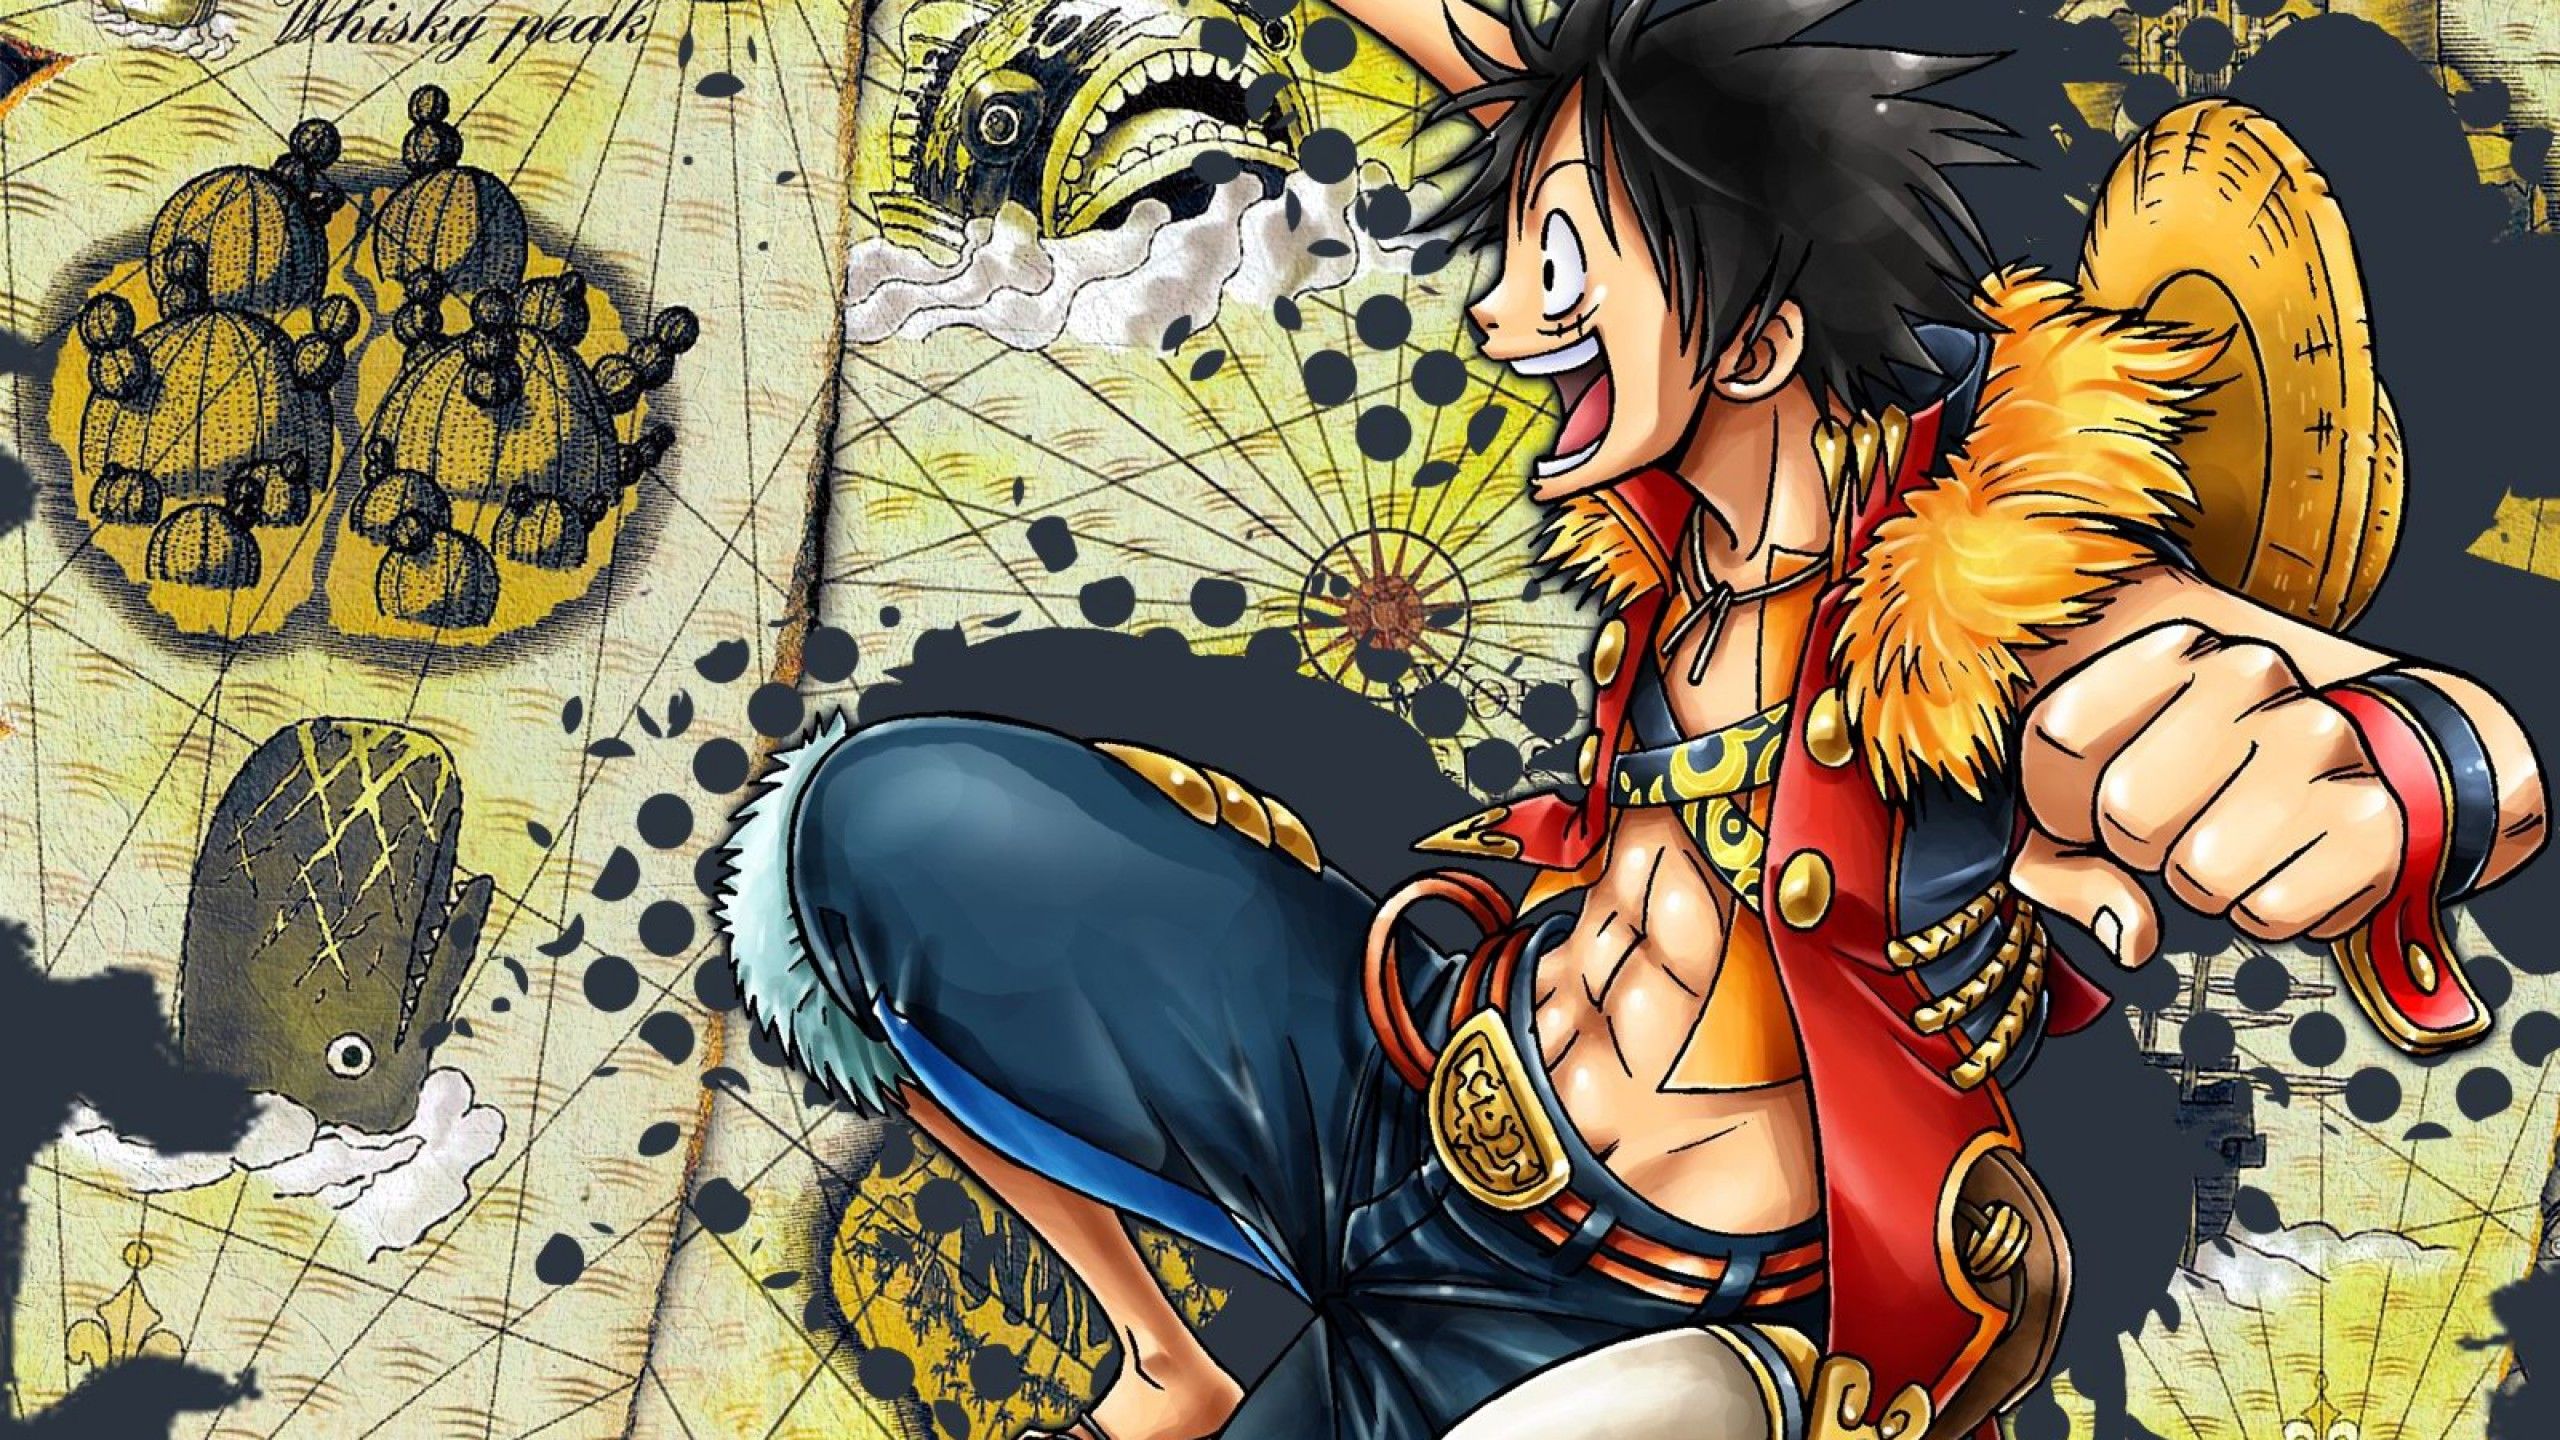 One Piece New World Wallpaper Download HD 10505 - HD Wallpapers Site